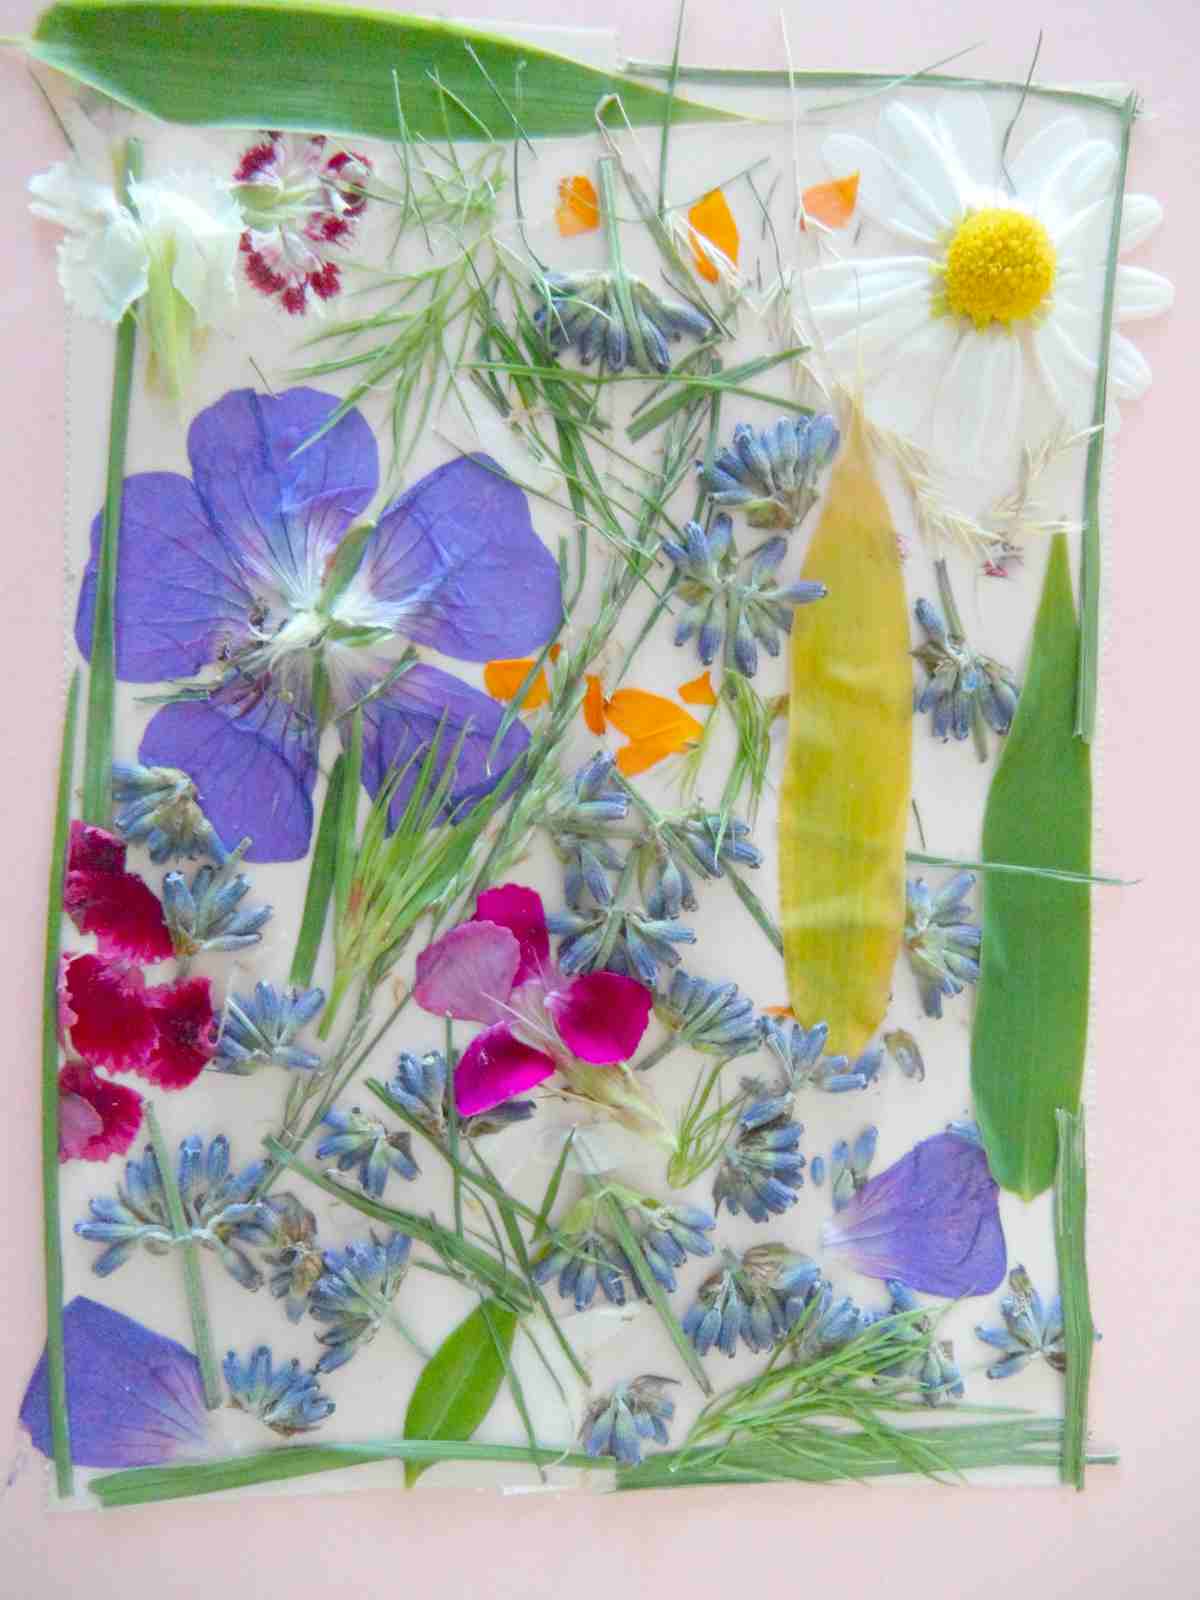 pressed art ditzy flowers | How To Press Flowers For Your Arts And Crafts Projects | how to press flowers | pressed flower art